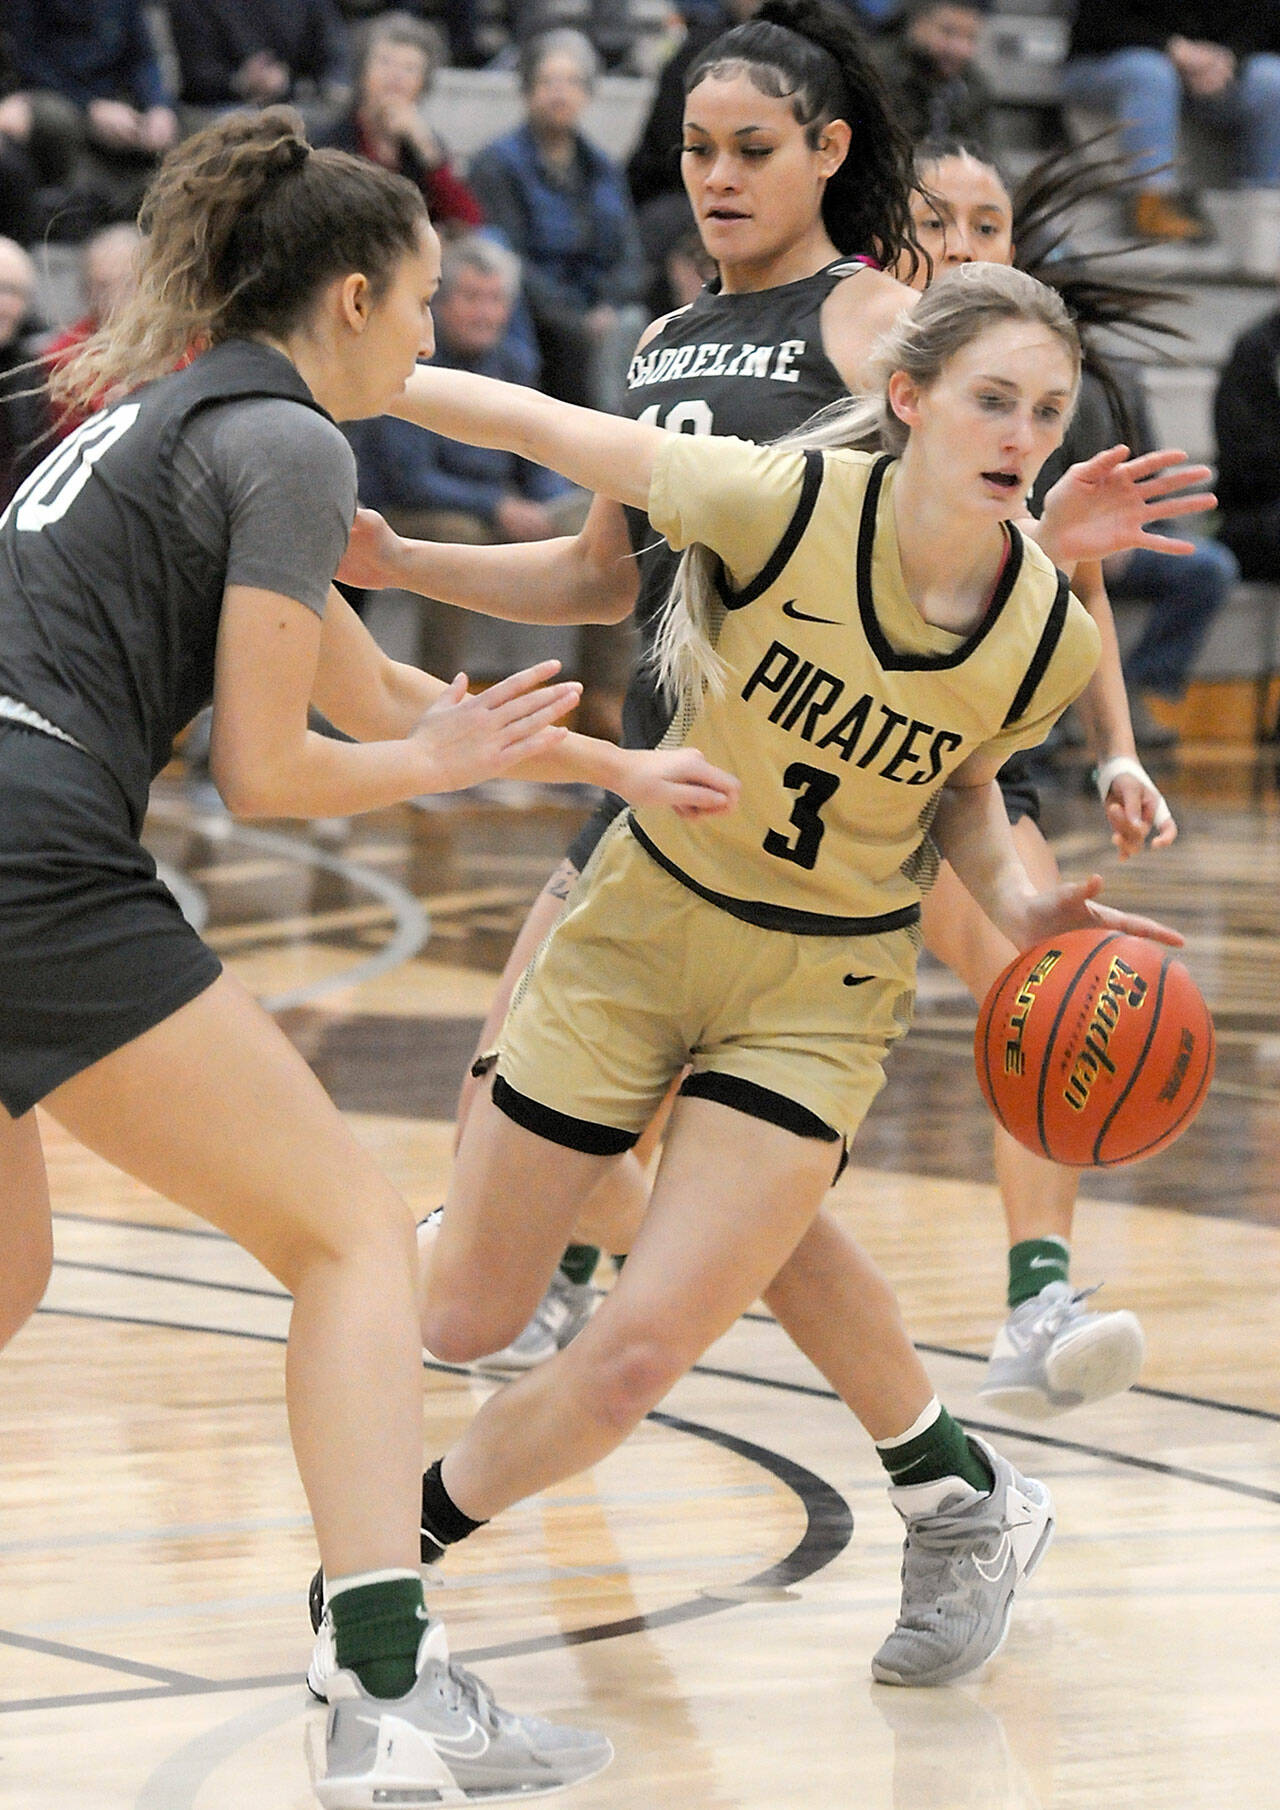 Peninsula’s Millie Long weaves around the defense of Shoreline’s Grace Browning, left, and Aloha Akaka during Saturday’s NWAC North Region game in Port Angeles. (Keith Thorpe/Peninsula Daily News)